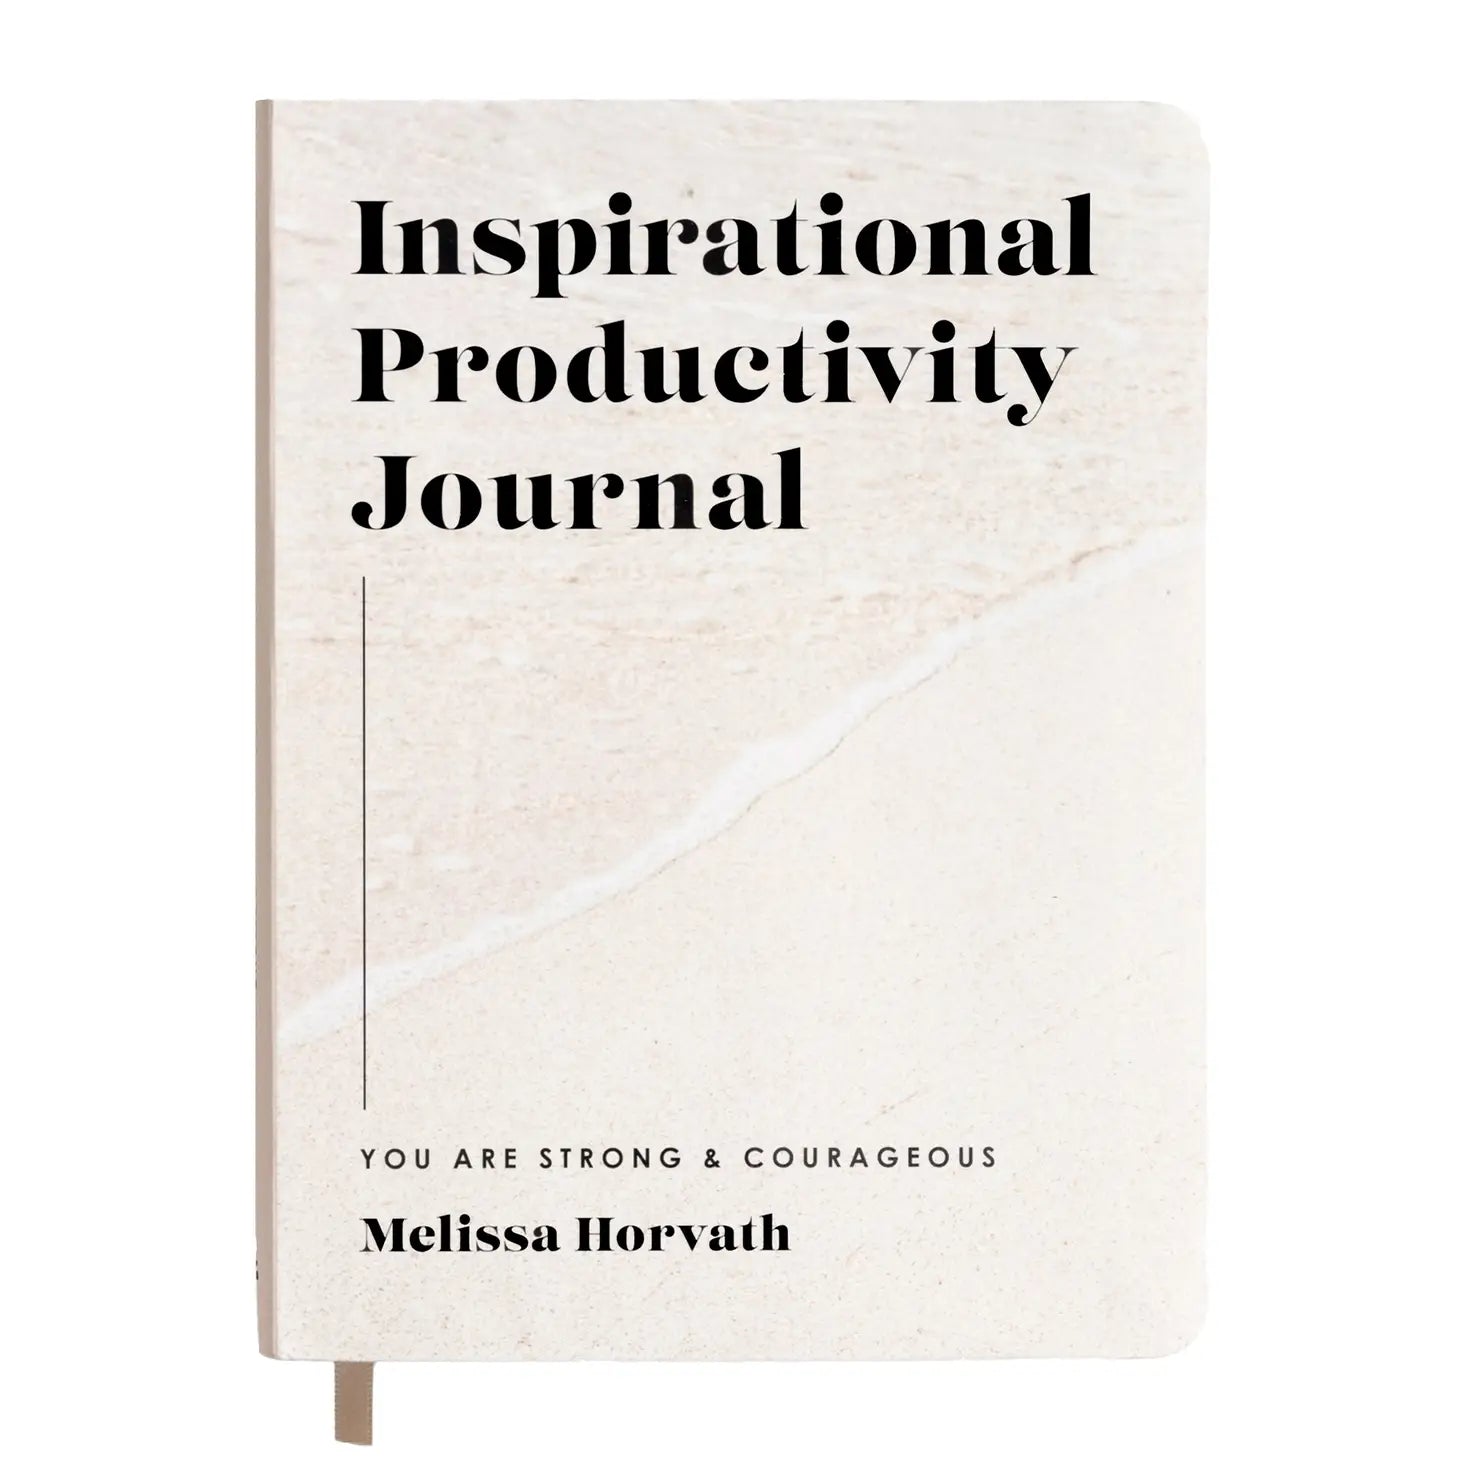 beige journal labeled "inspirational productivity journal"